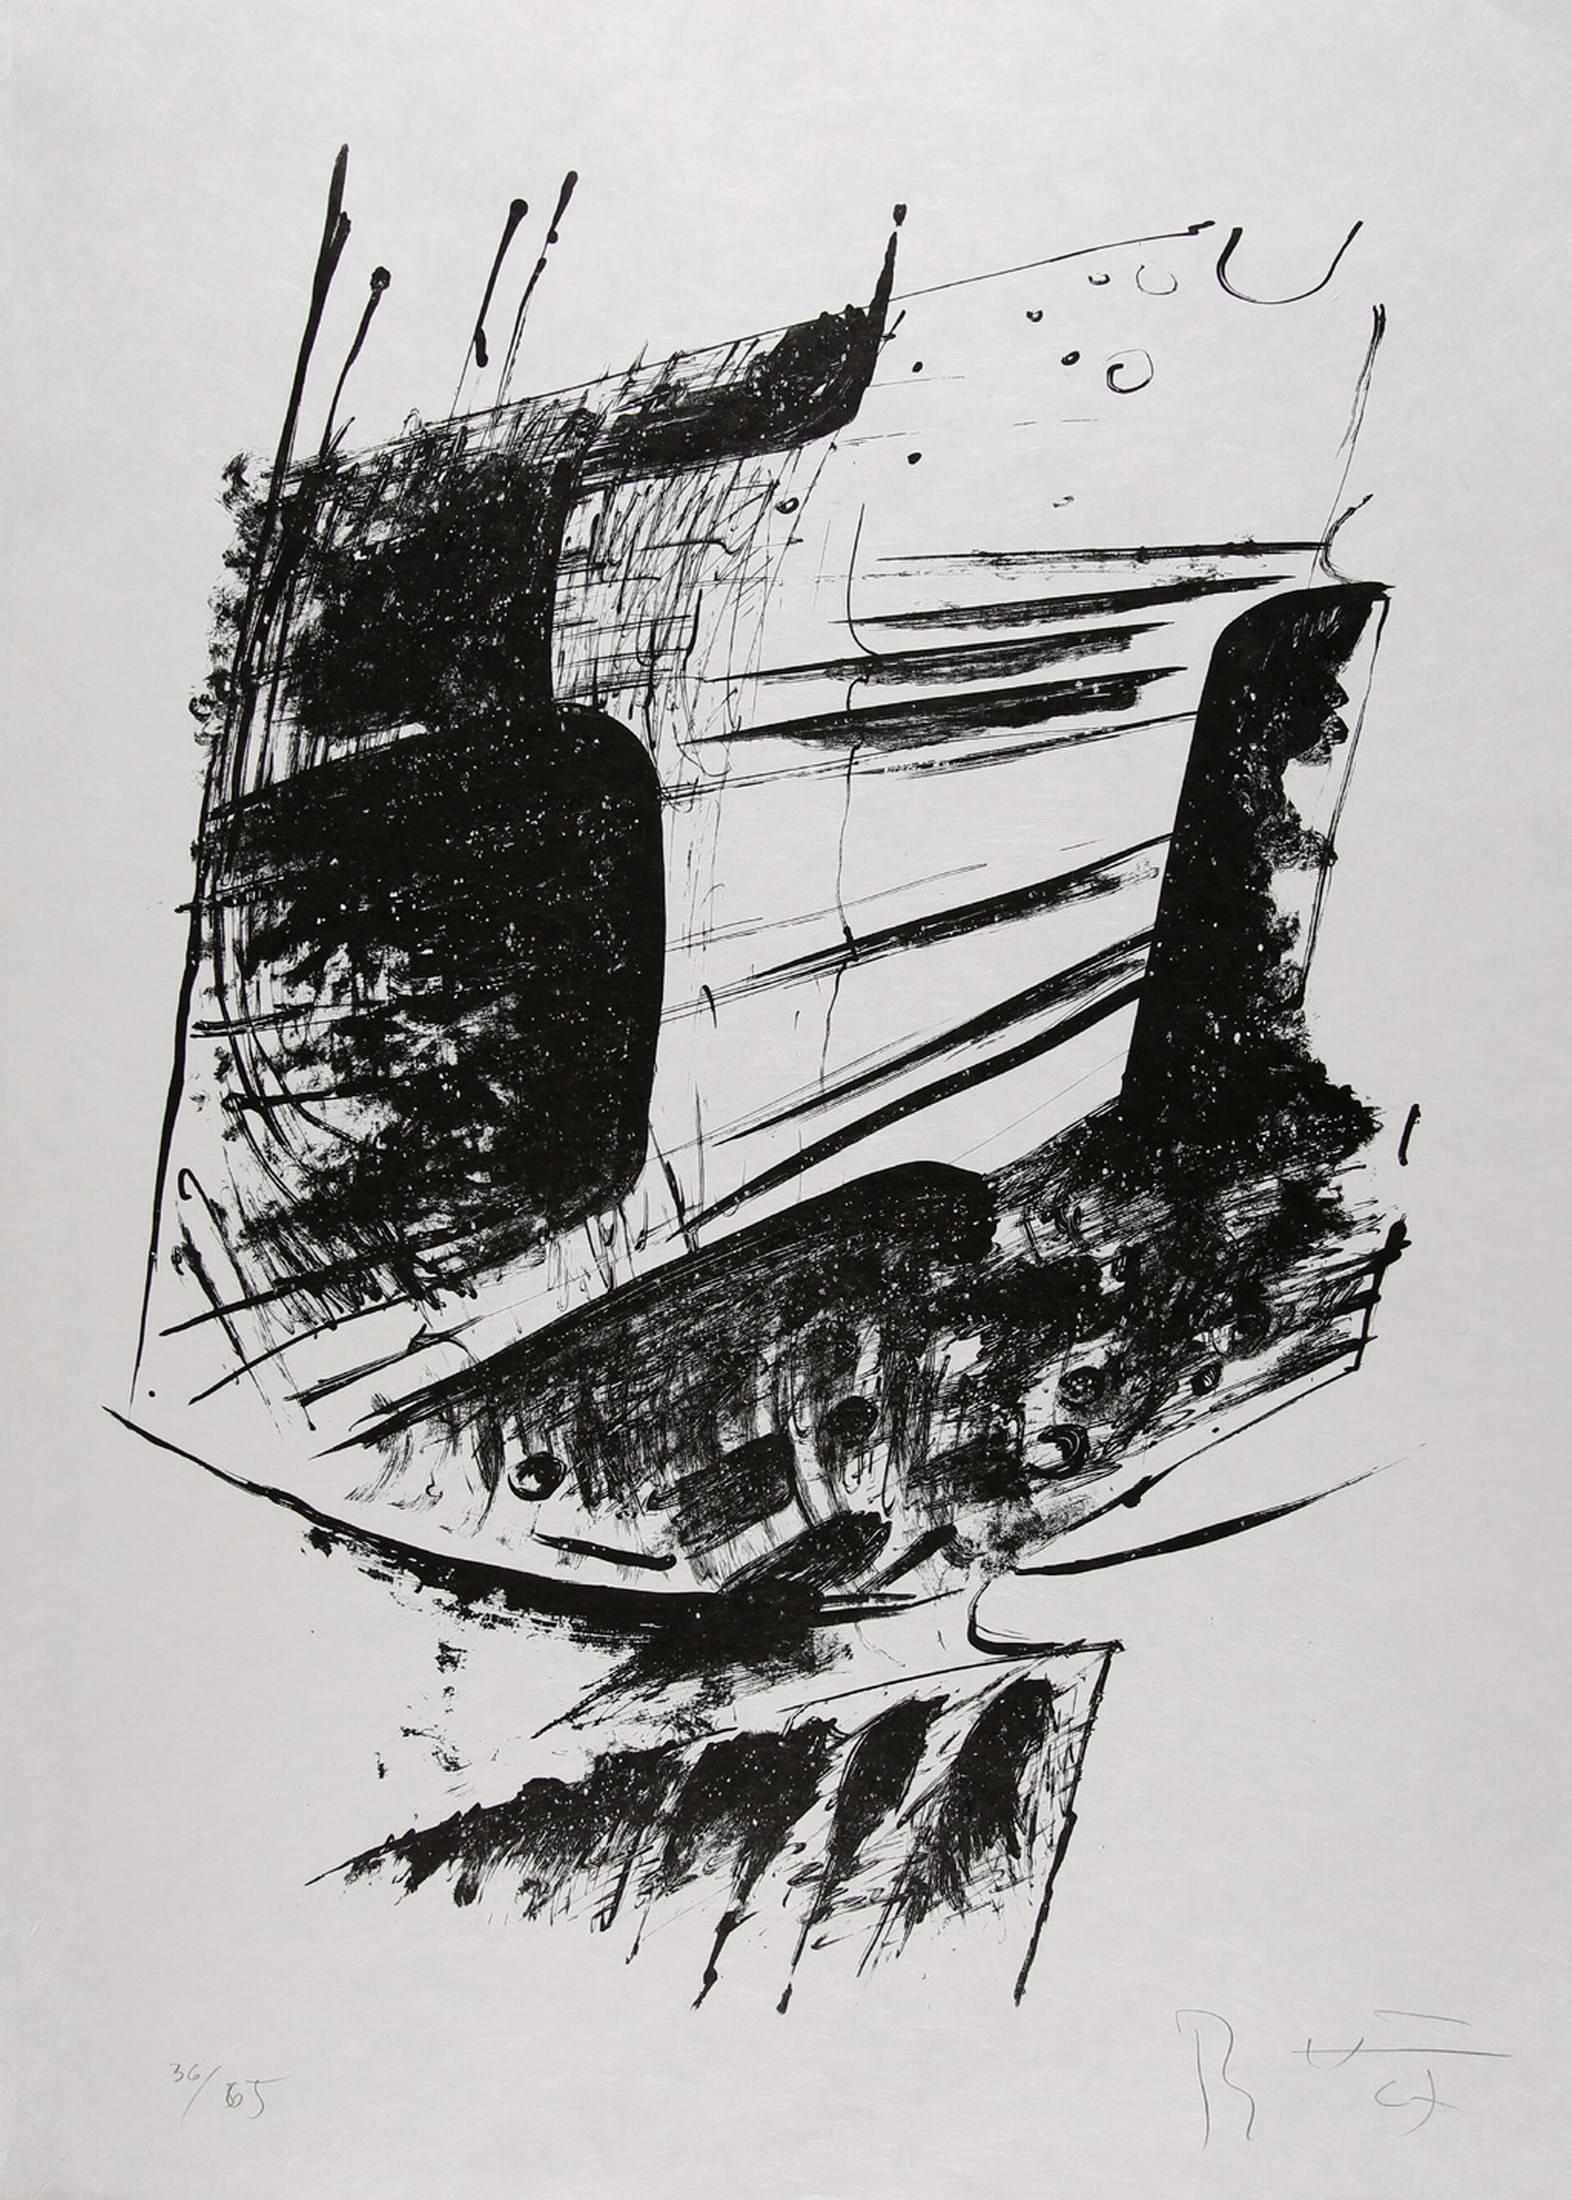 Bernhard Heiliger Abstract Print - Untitled Abstract Expressionist Composition